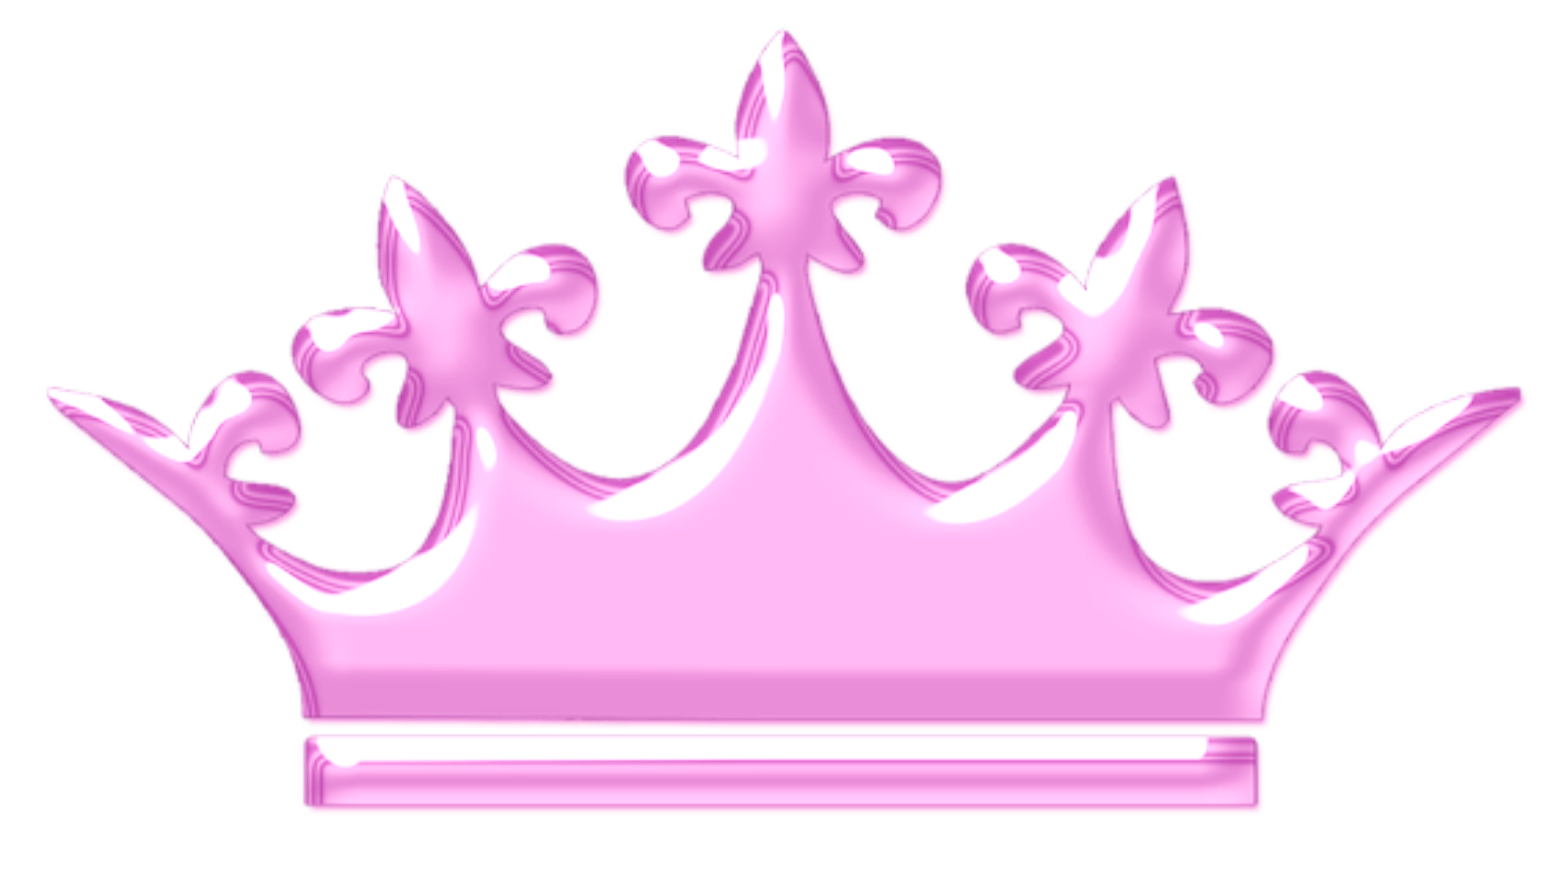 clipart crown pink